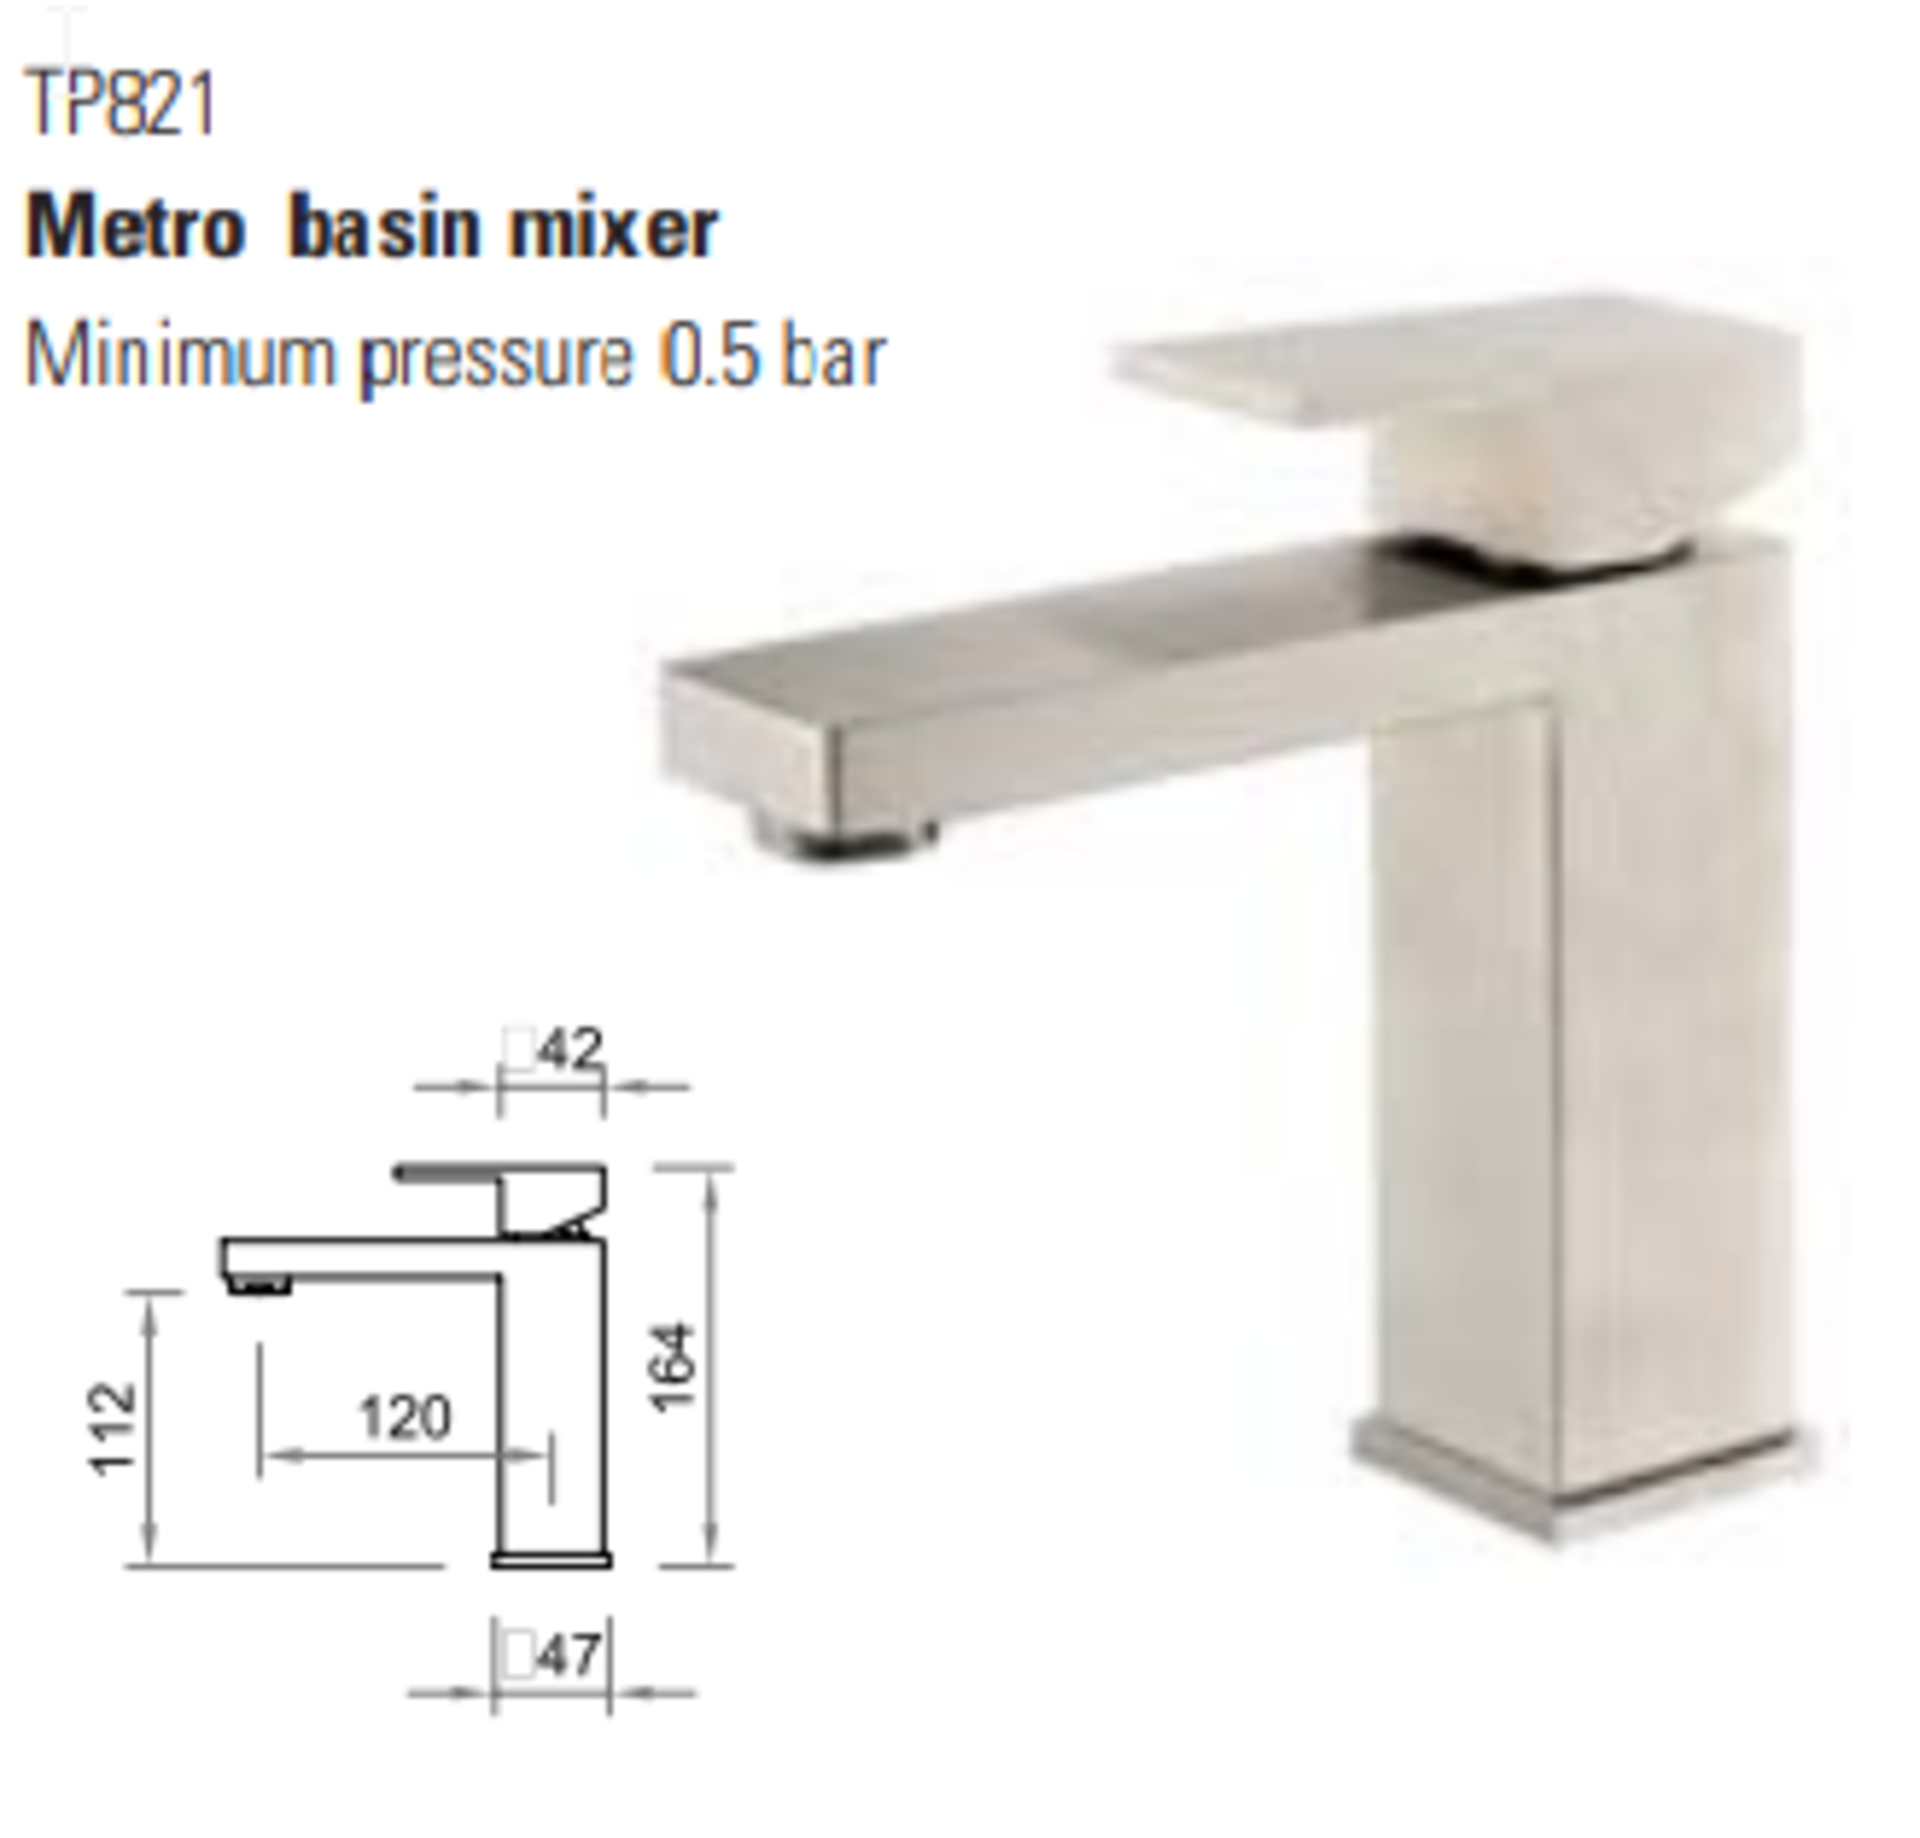 1 x Stonearth 'Metro' Stainless Steel Basin Mixer Tap - Brand New & Boxed - RRP £245 - Ref: TP821